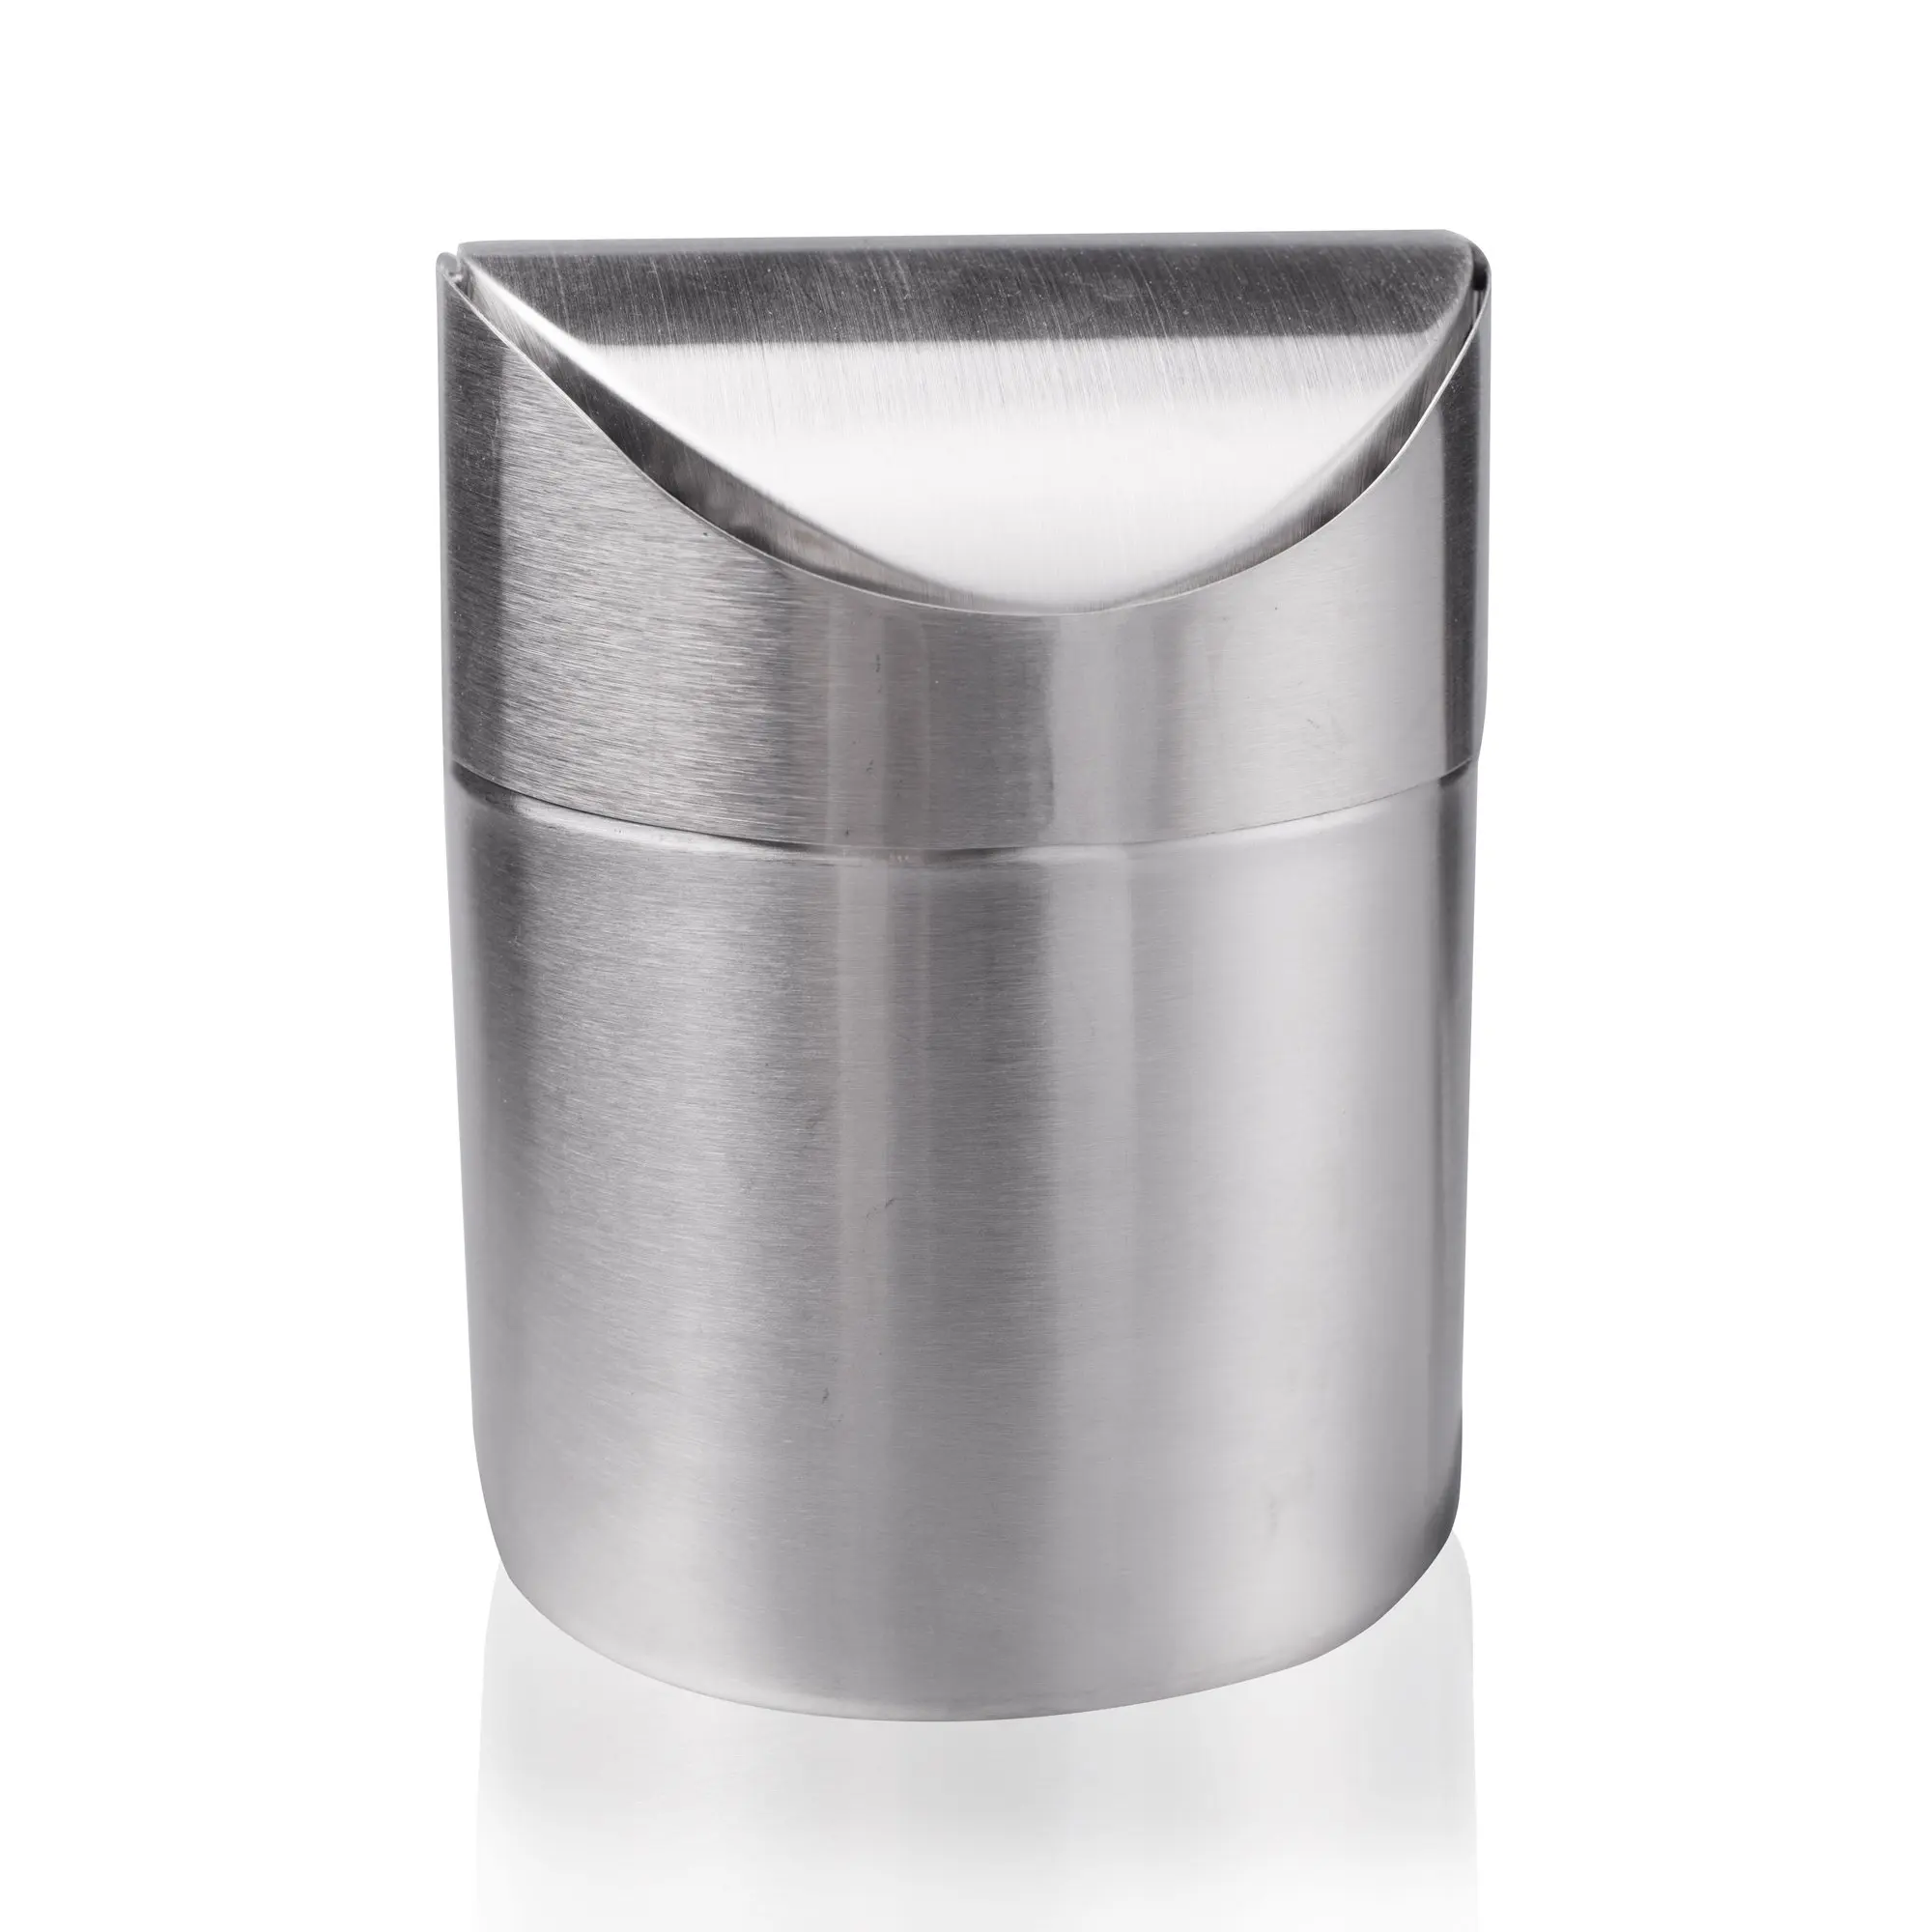 Imeea Mini Countertop Trash Can With Swing Top Sus304 Brushed